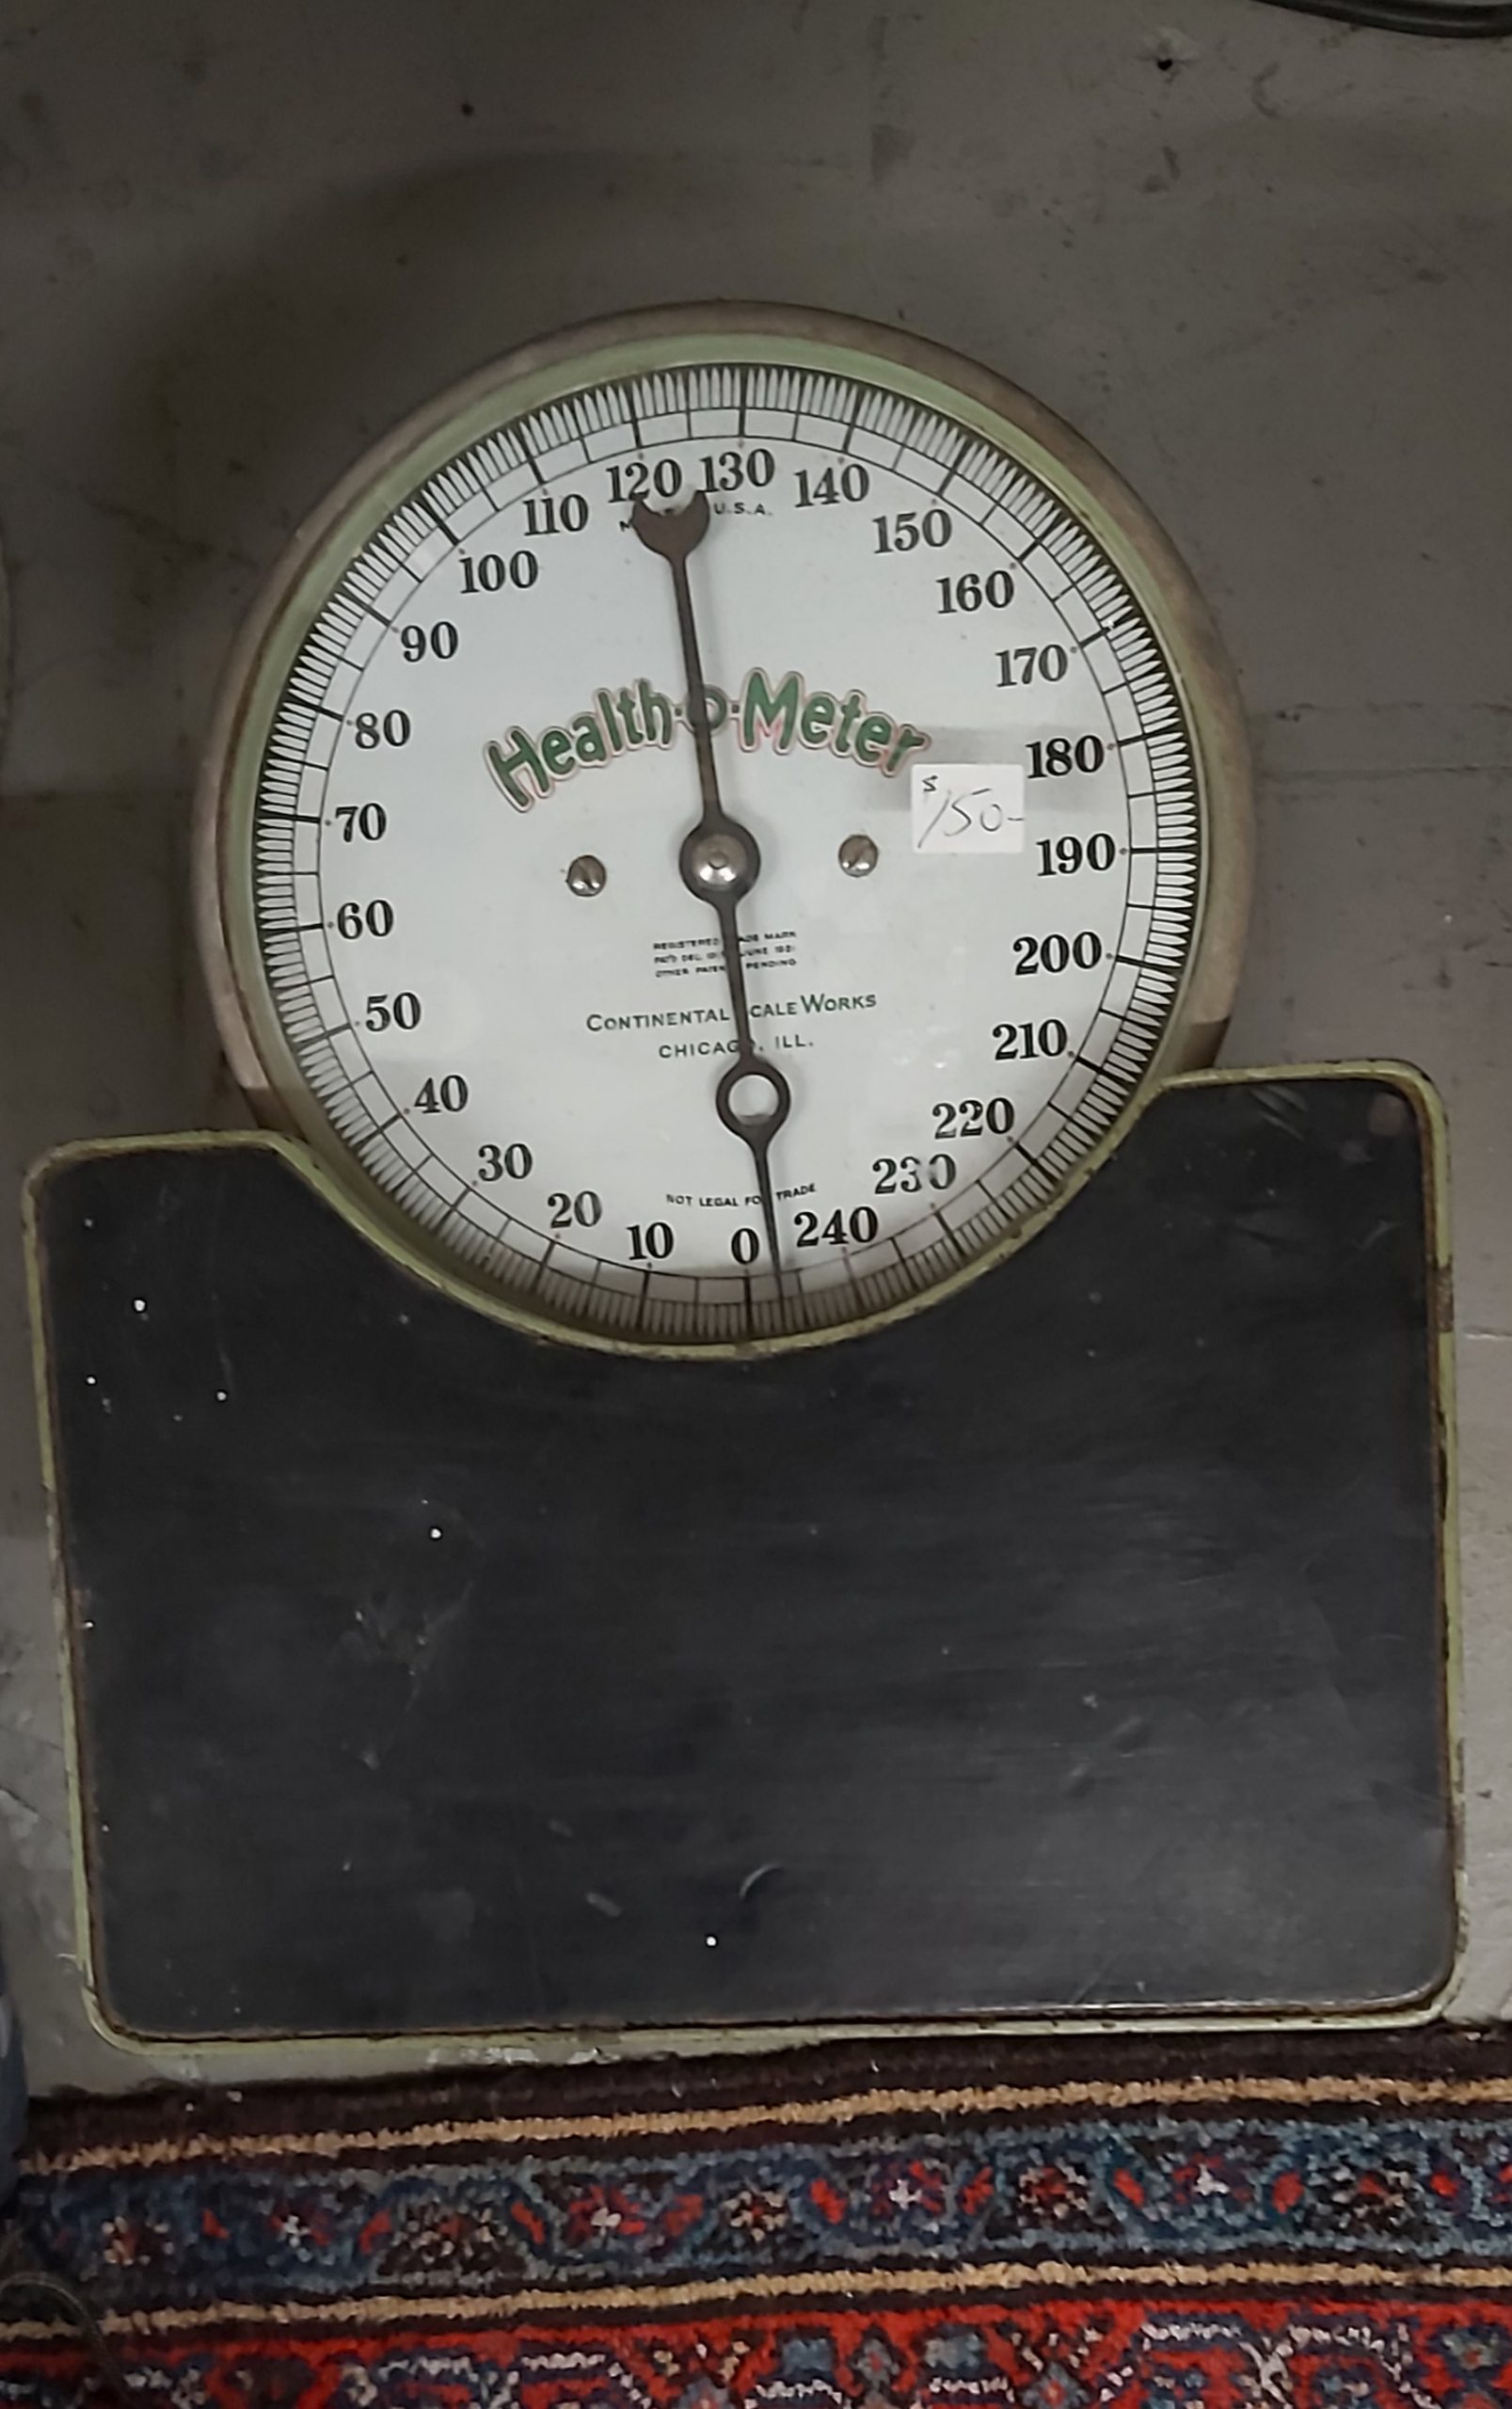 Antique Health O Meter Bathroom Scale,early 1900s,works,black White,250  Lbs,rustic Scale,farmhouse Scale,continental Scale Works,distressed -   Denmark